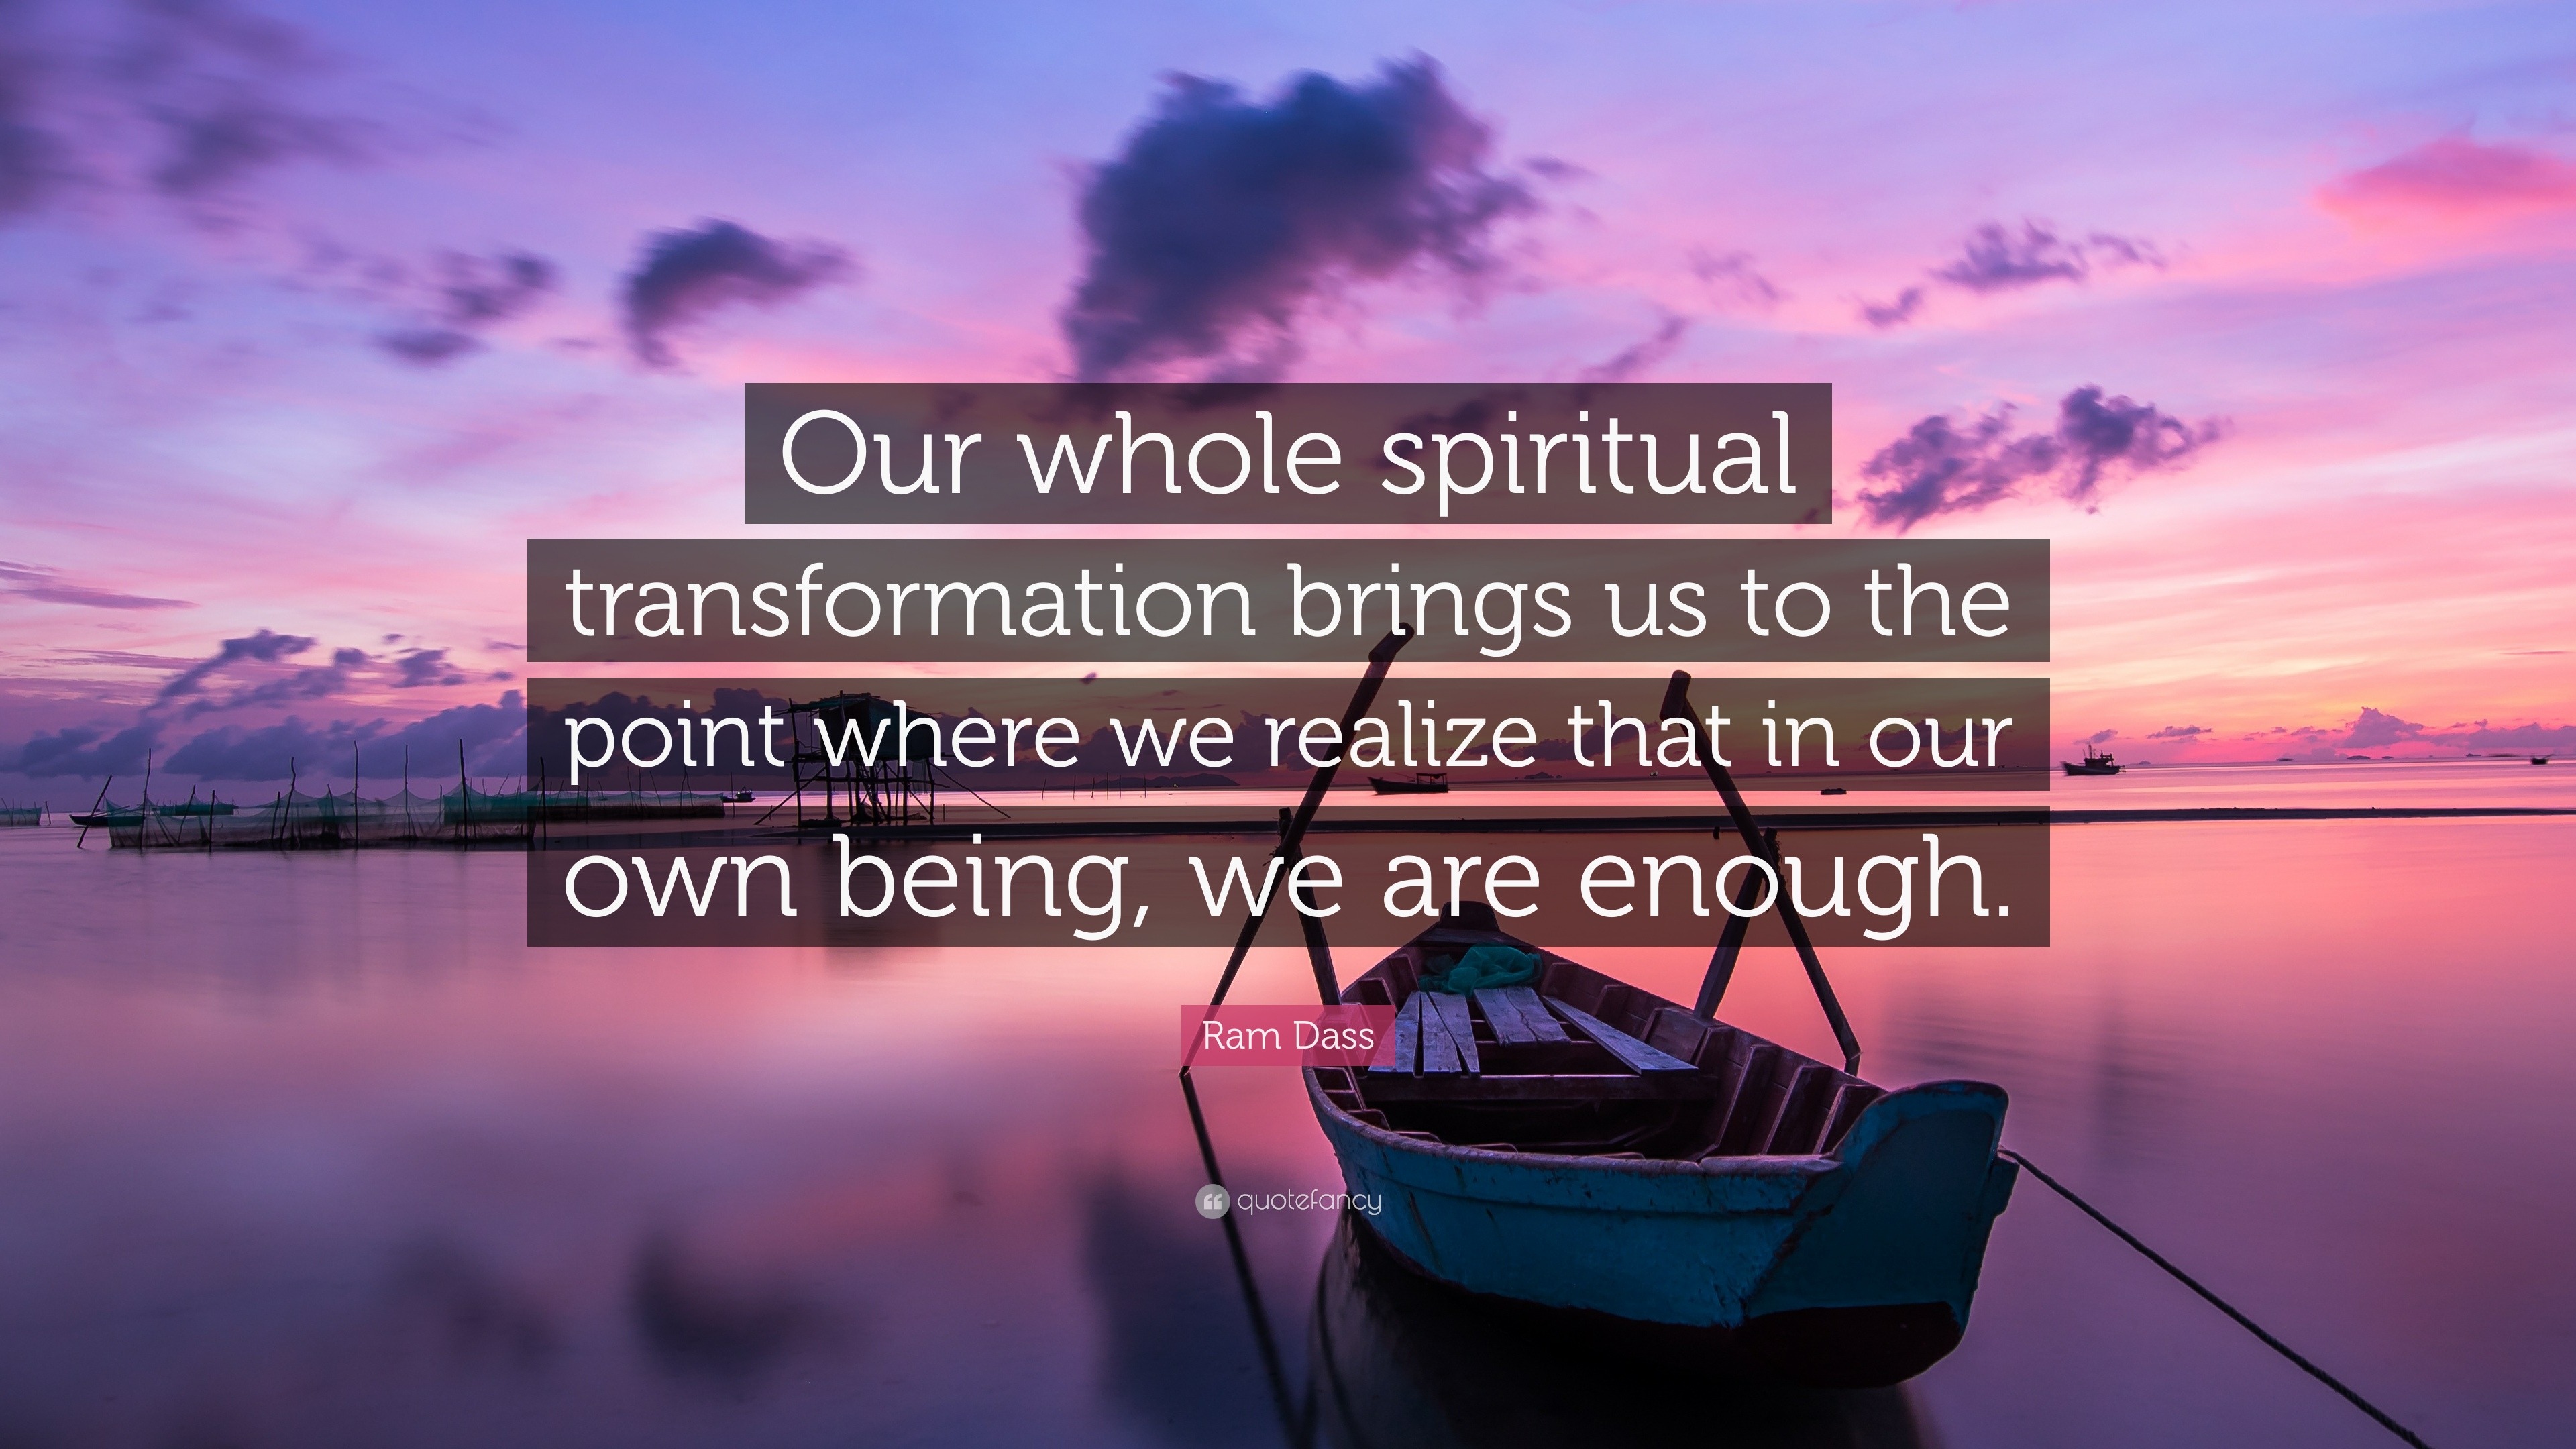 Ram Dass Quote “Our whole spiritual transformation brings